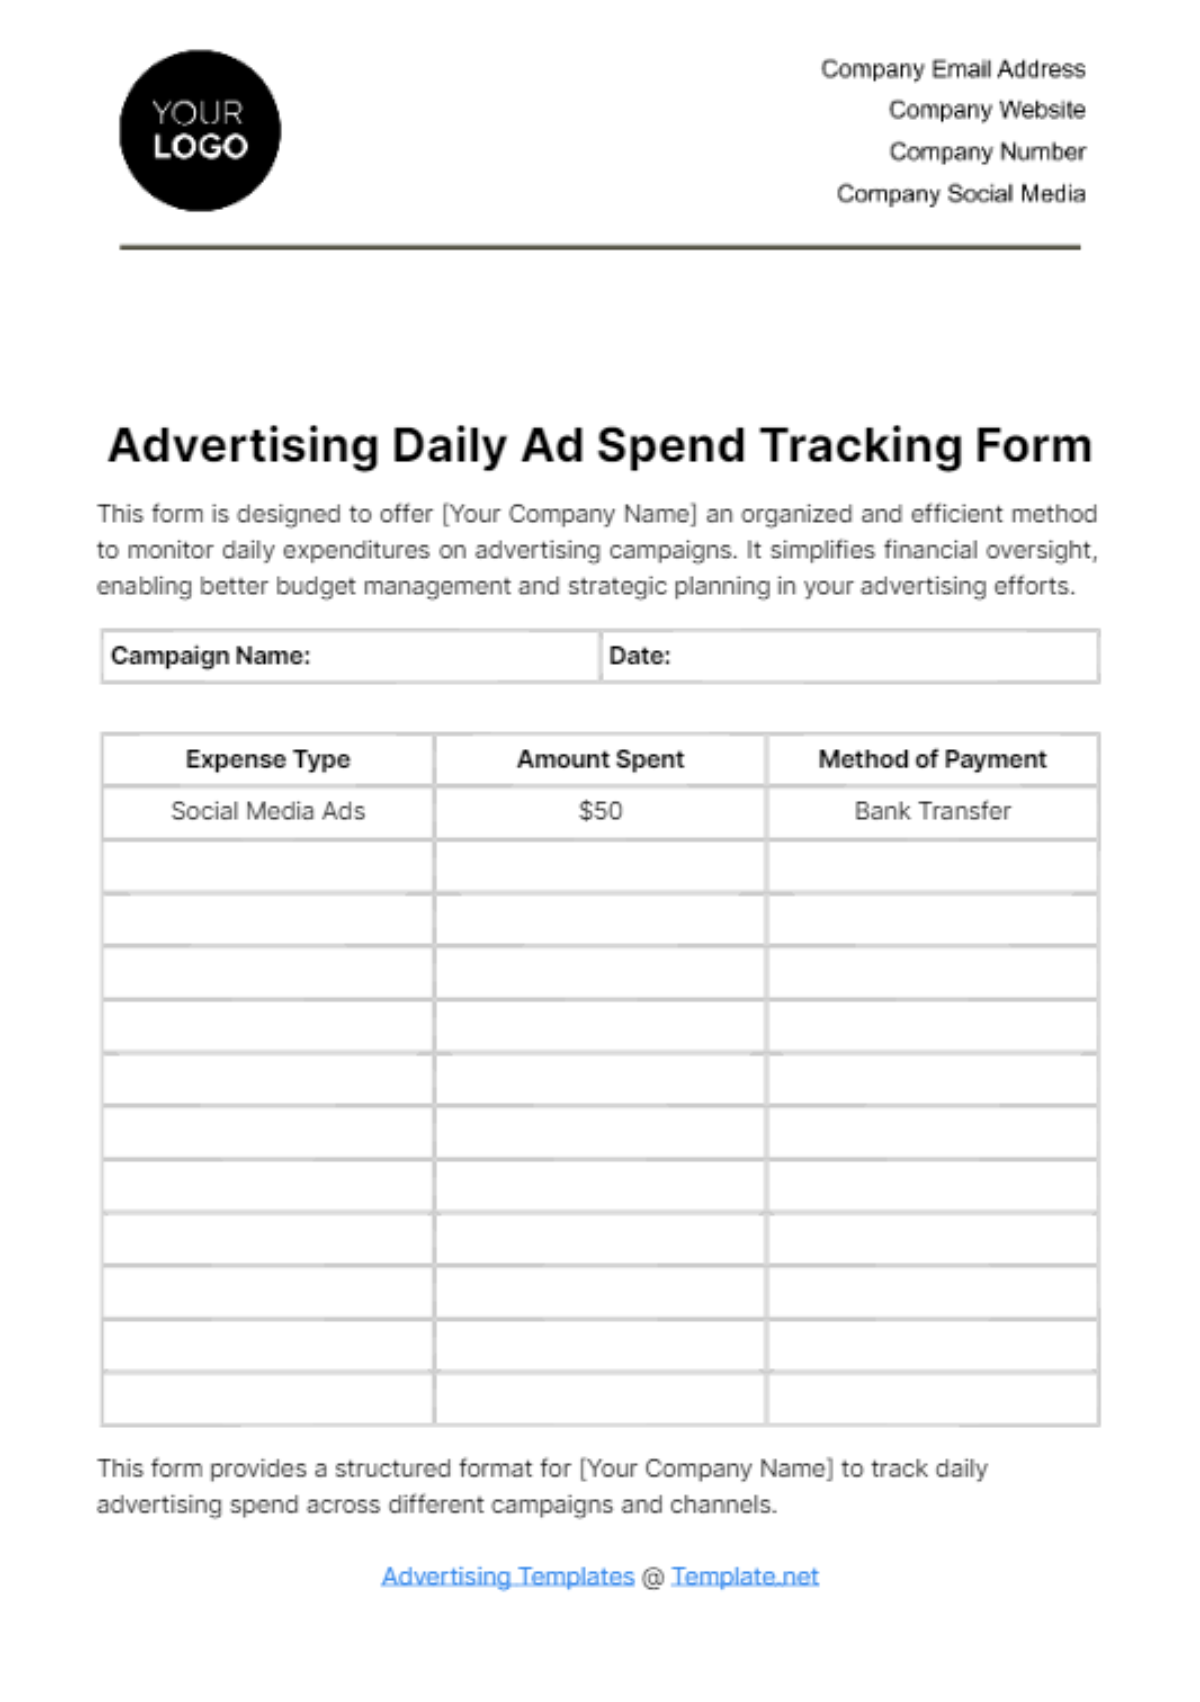 Advertising Daily Ad Spend Tracking Form Template